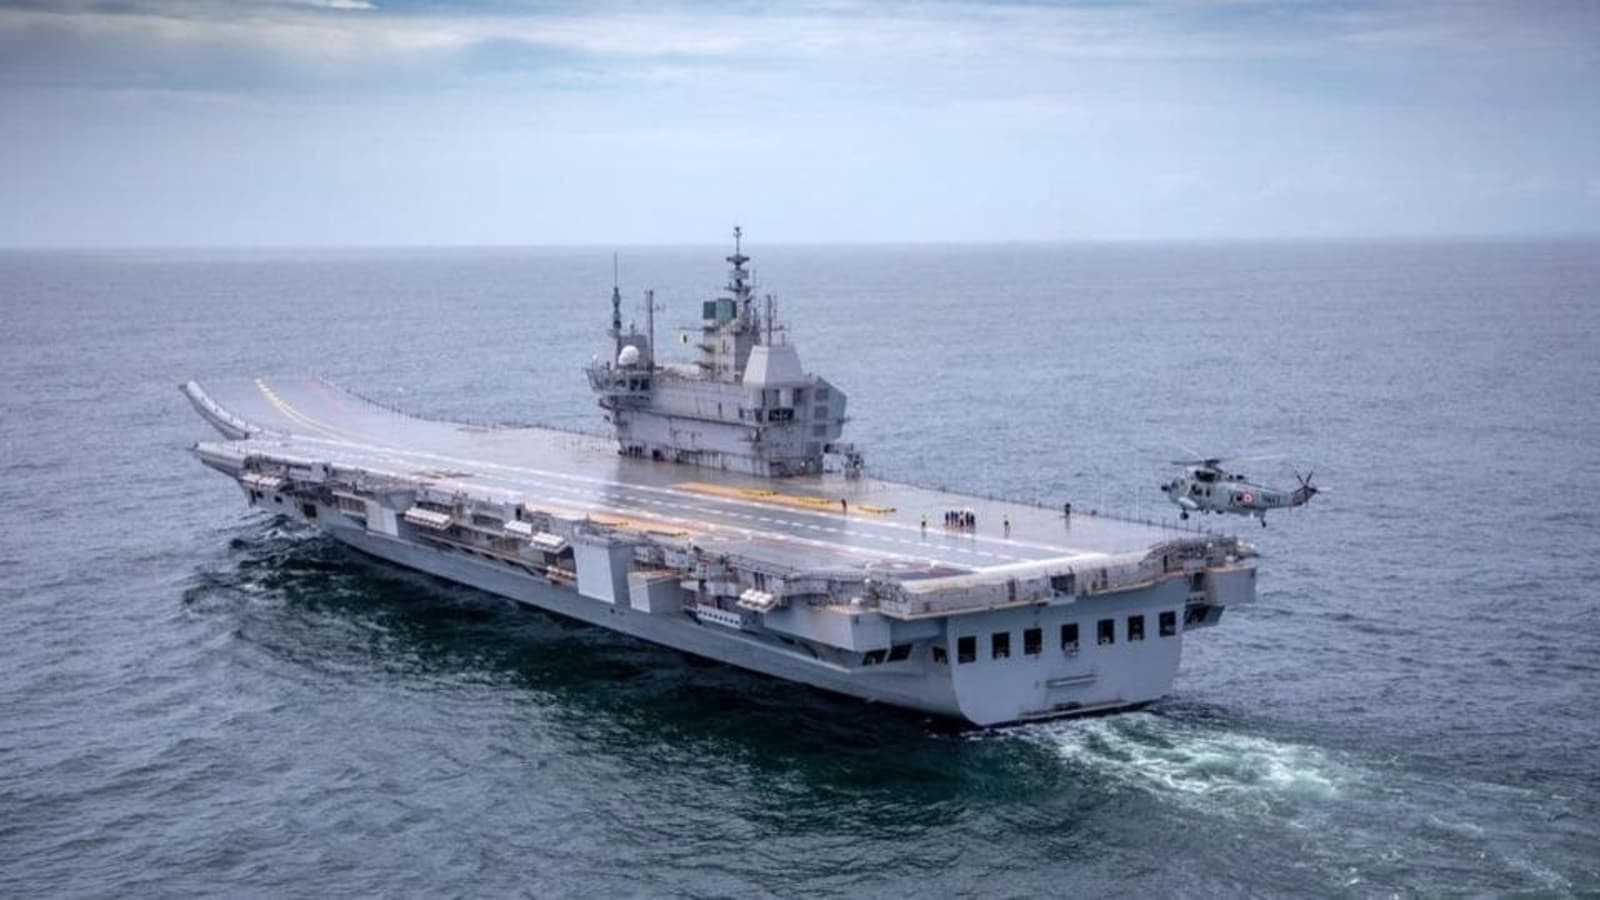 Historic moment for India': Aircraft carrier Vikrant returns after sea trials. Latest News India